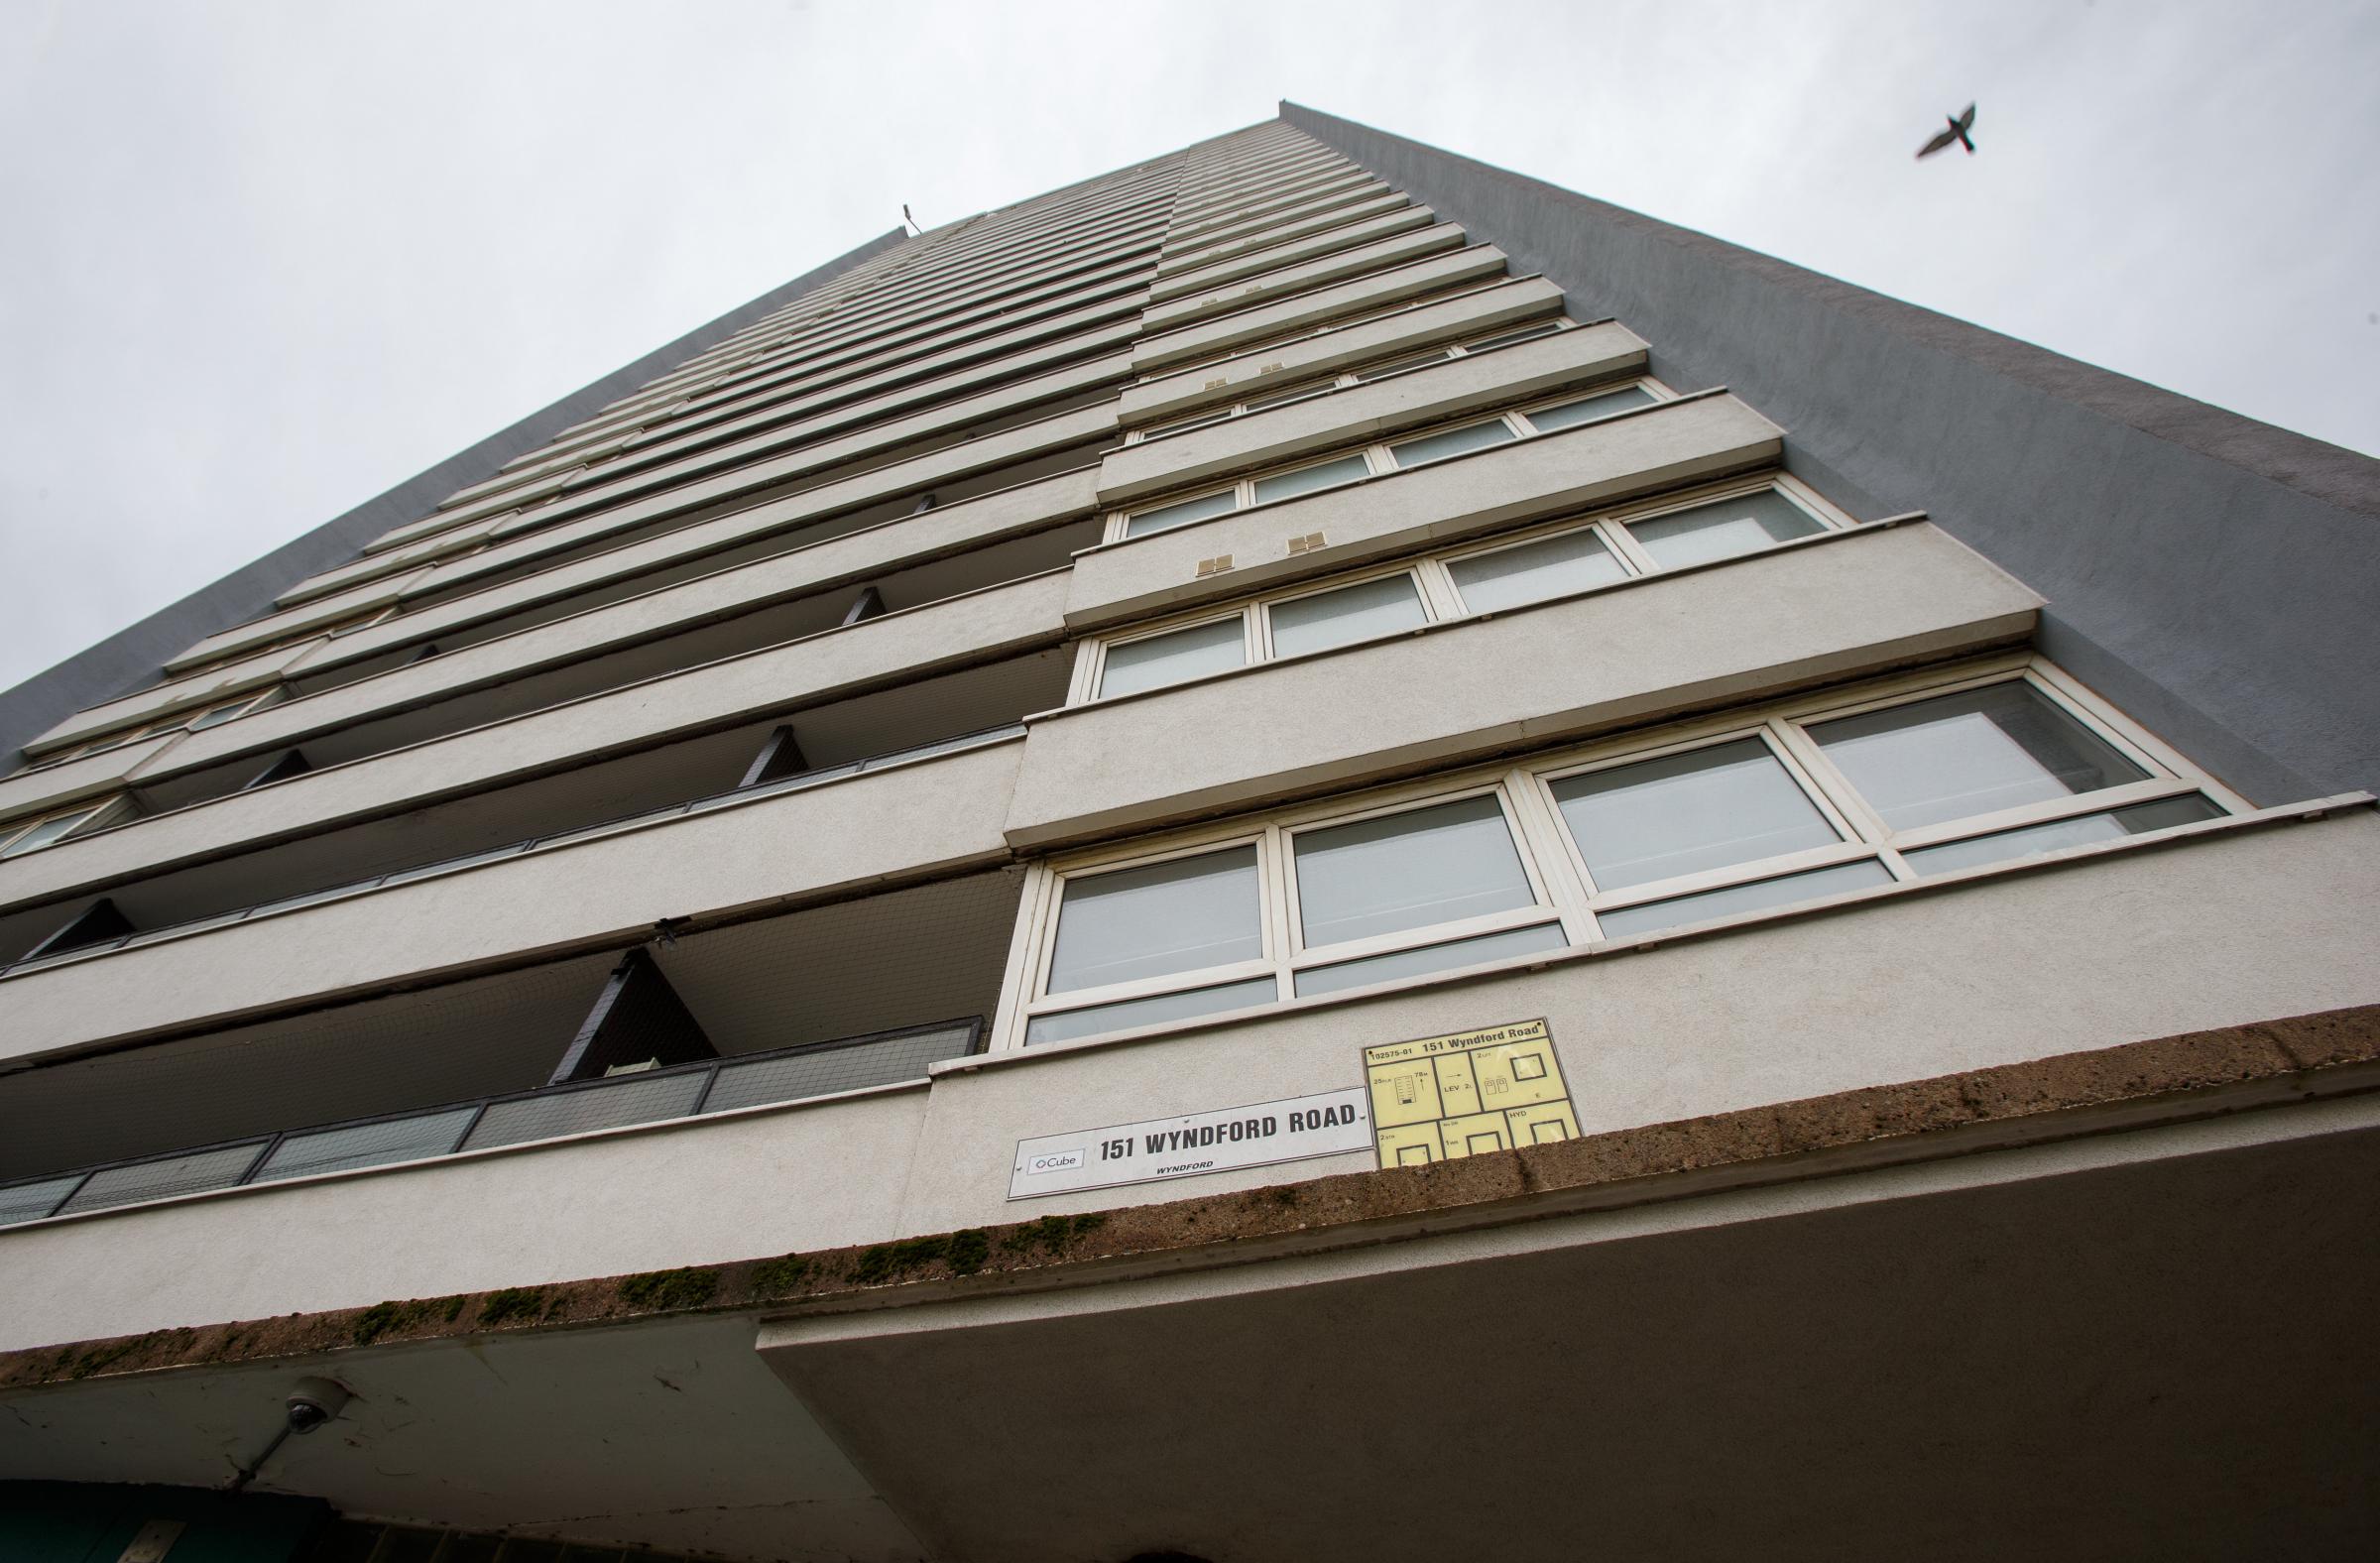 The tower block at 151 Wyndford Road, Maryhill. 151 is one of four tower blocks in the Wyndford that are earmarked for demolition. Photograph by Colin Mearns.